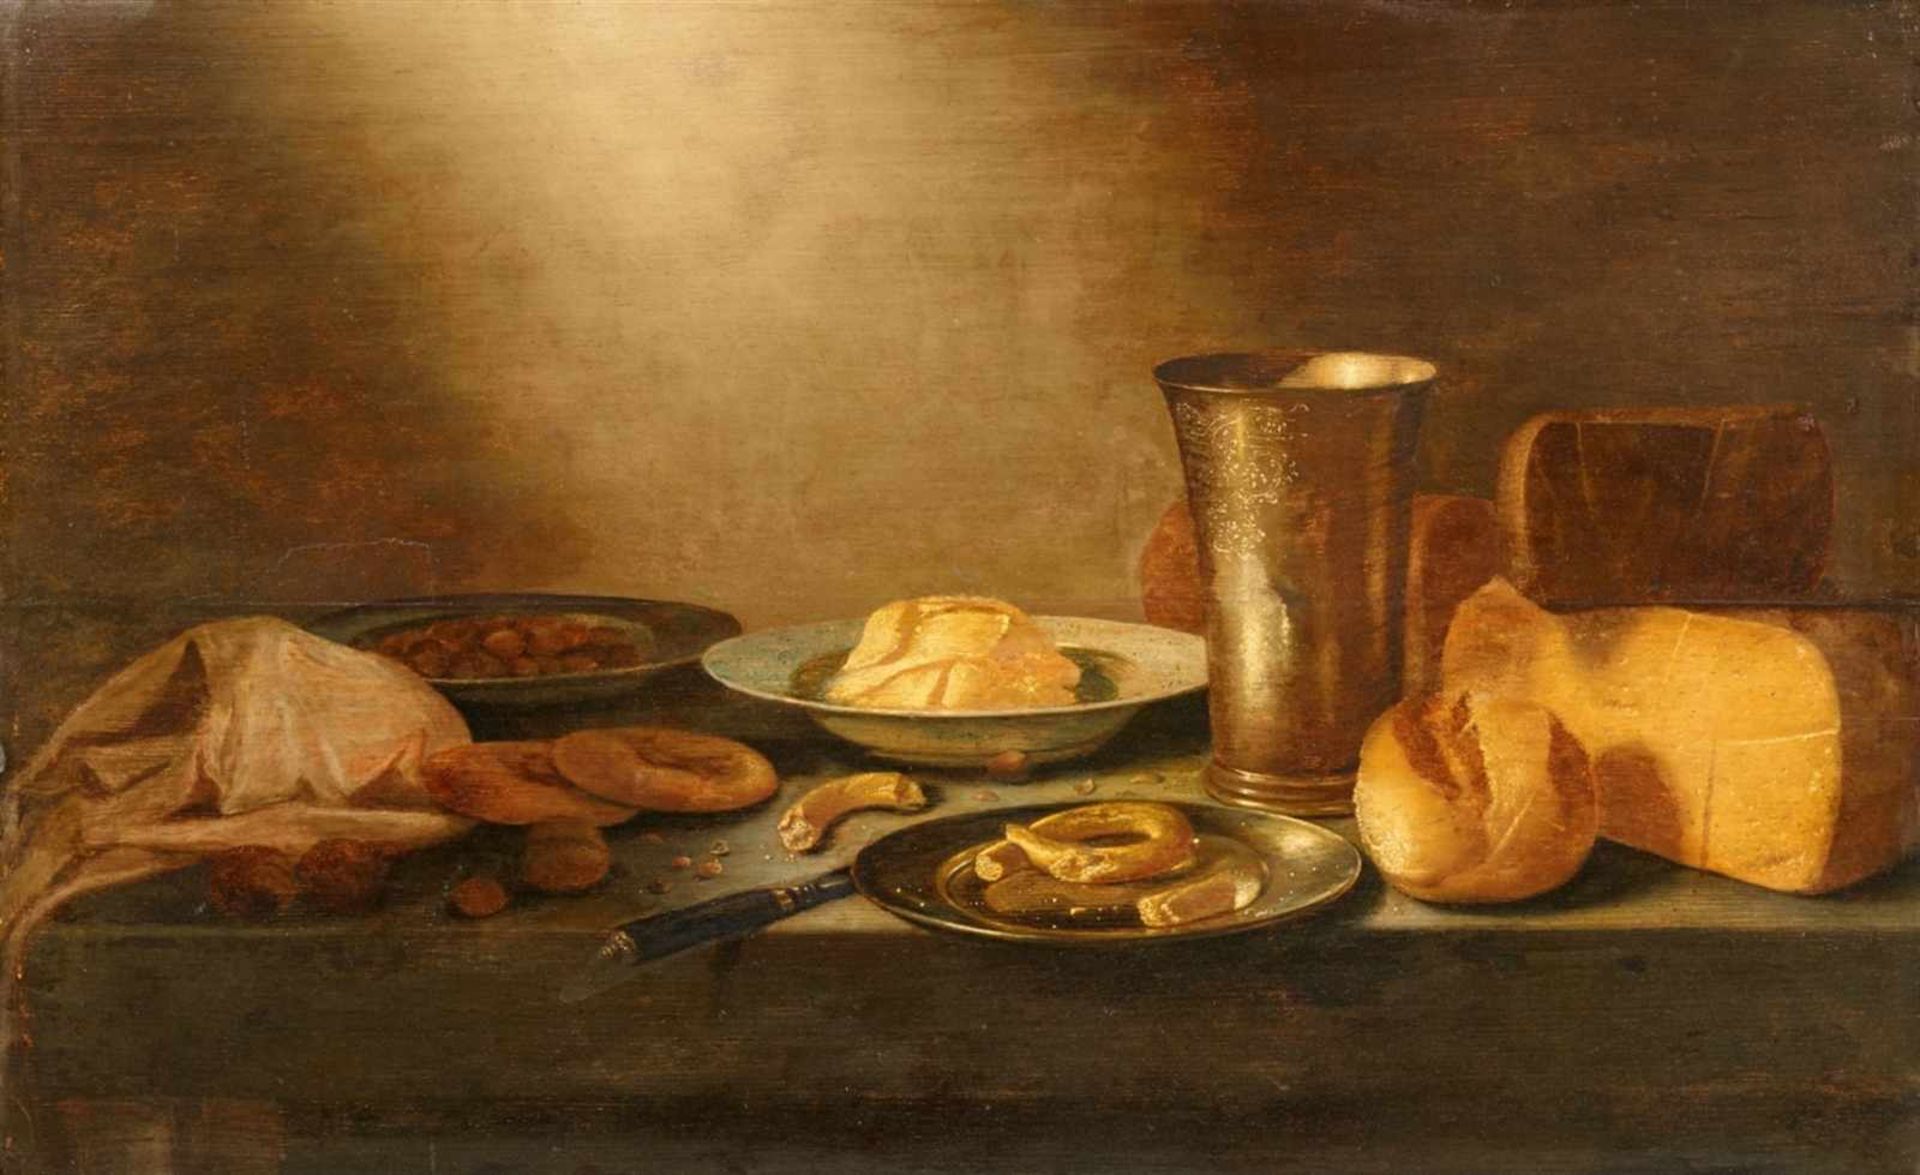 Floris van SchootenStill Life with Cheese, Bread, and a Silver BeakerOil on panel. 51.5 x 82.5 cm.